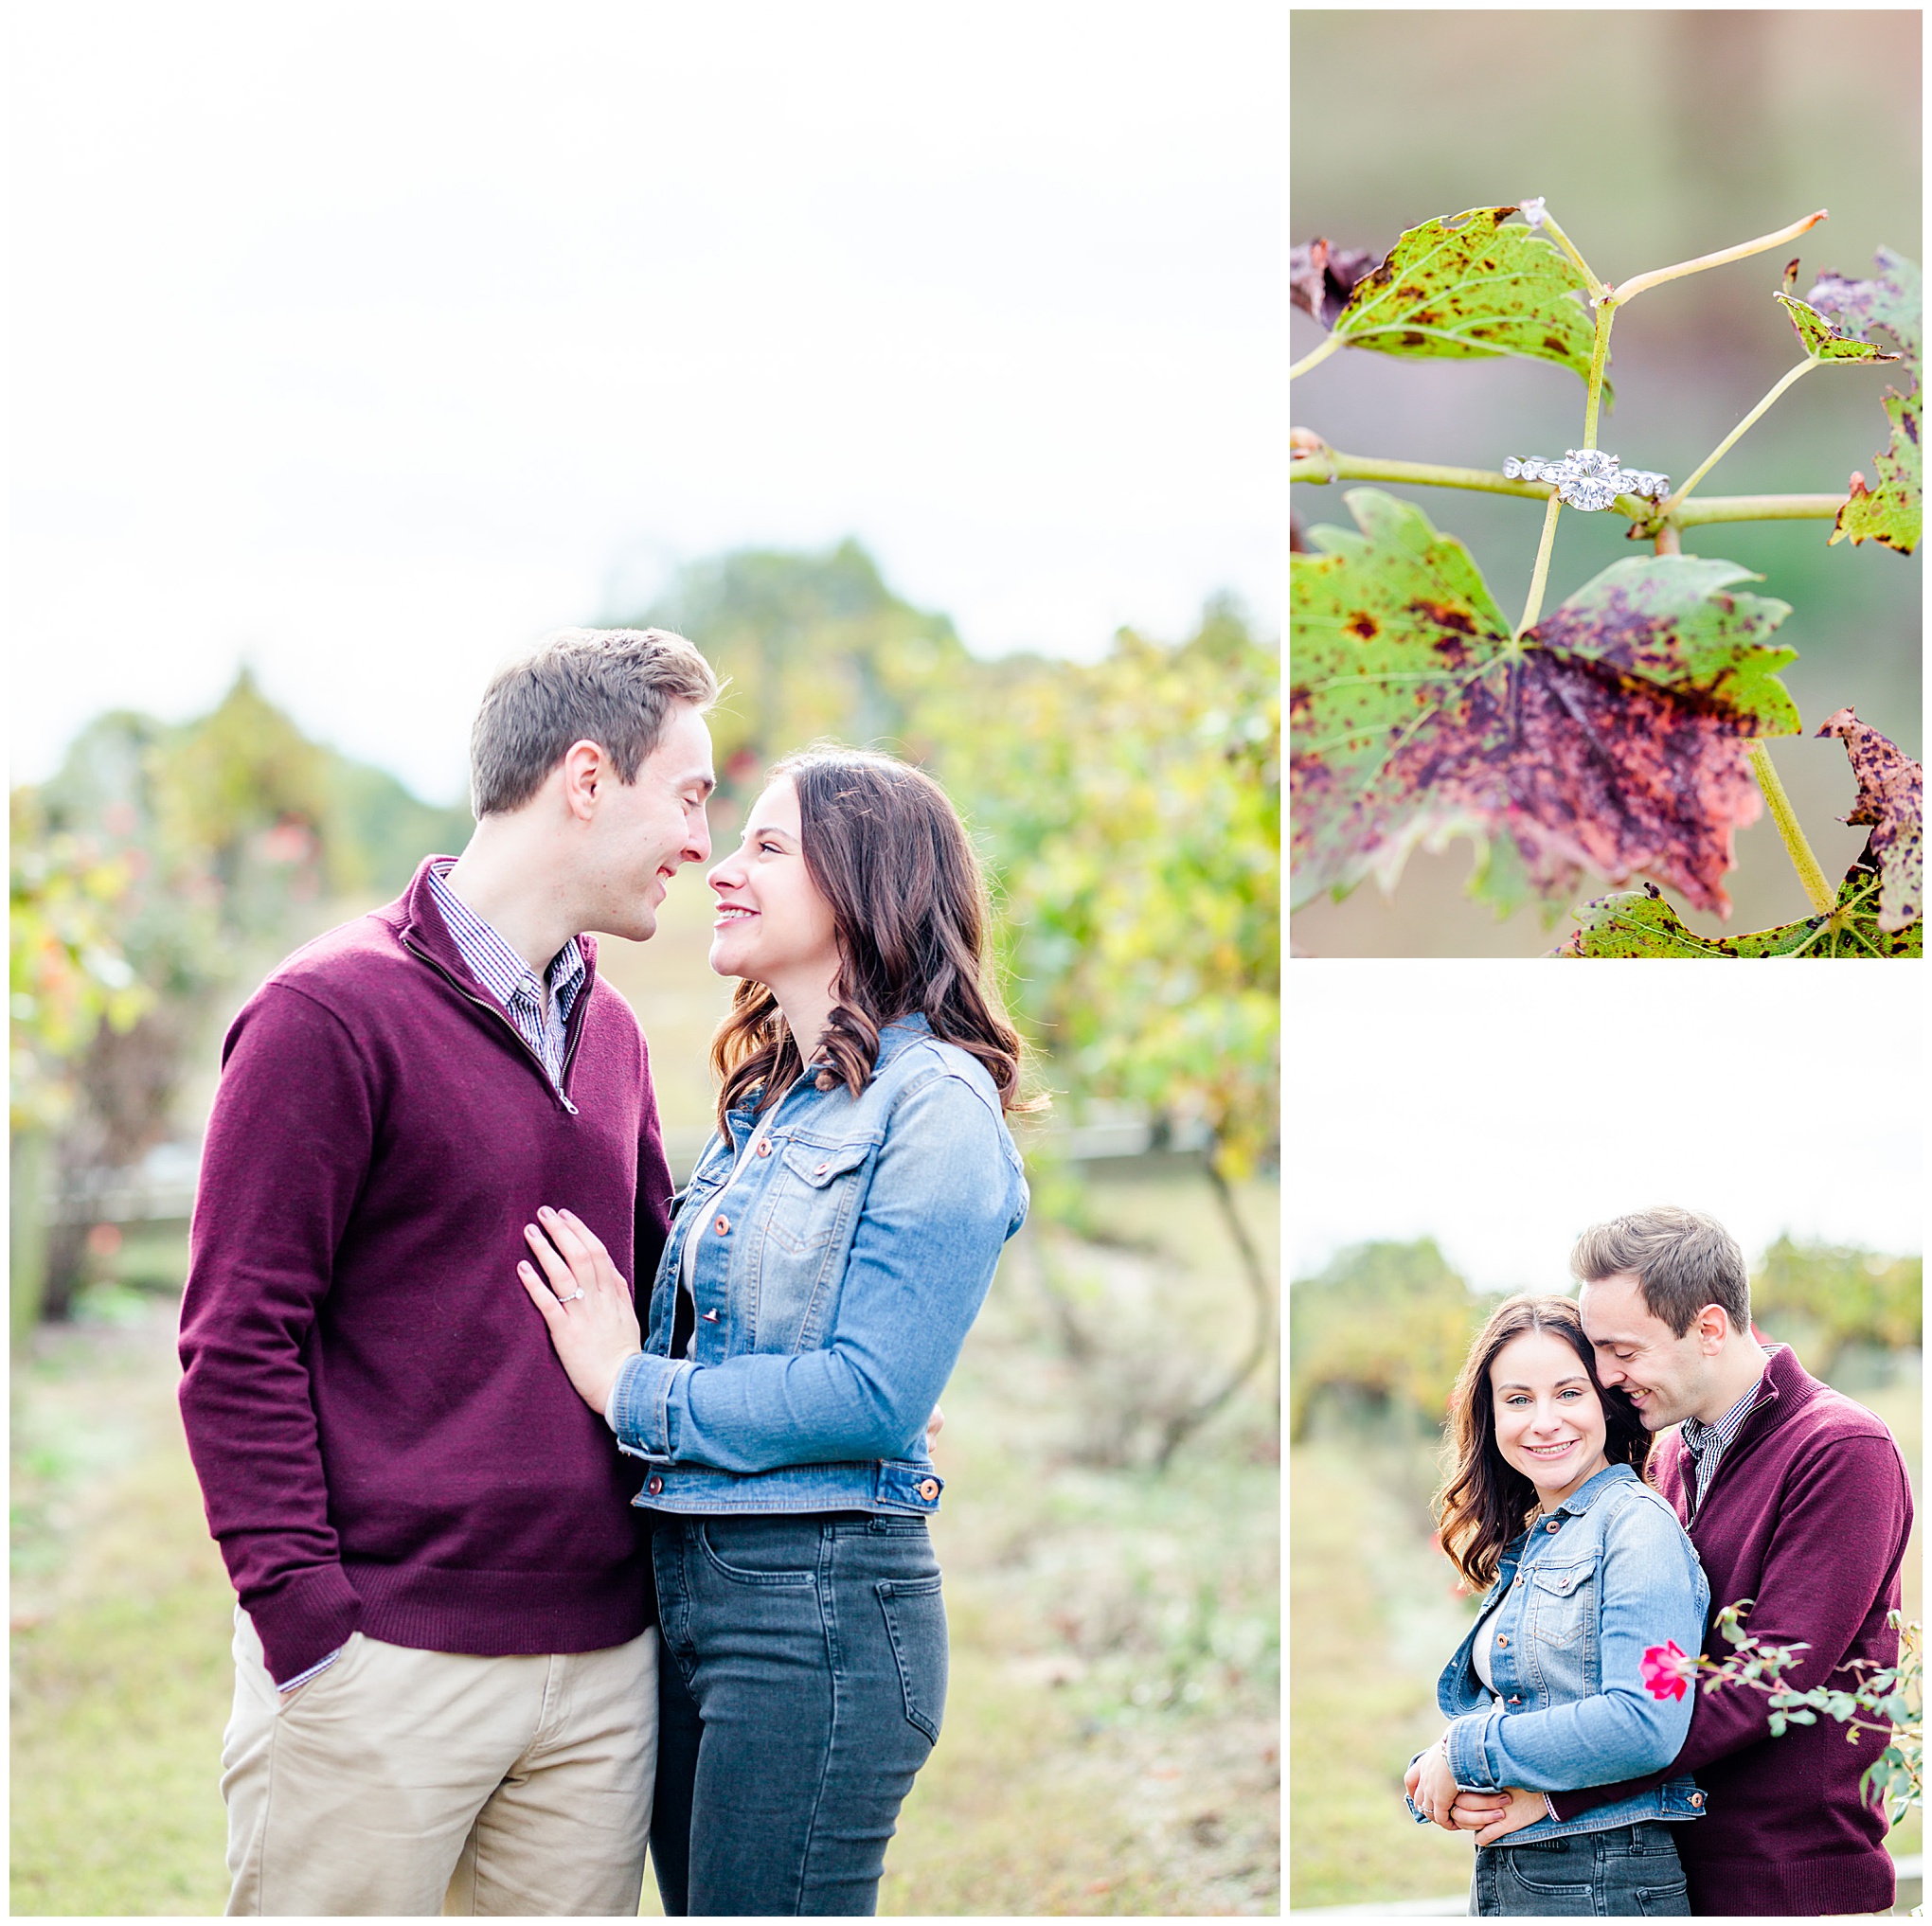 Running Hare Vineyard surprise proposal, Maryland winery, Maryland proposal photographer, D.C. proposal photographer, Maryland engagement, surprise proposal, Running Hare Vineyard proposal, Running Hare Vineyard, D.C. wedding photographer, Rachel E.H. Photography, autumn proposal, autumn surprise proposal, vineyard portraits, diamond engagement ring